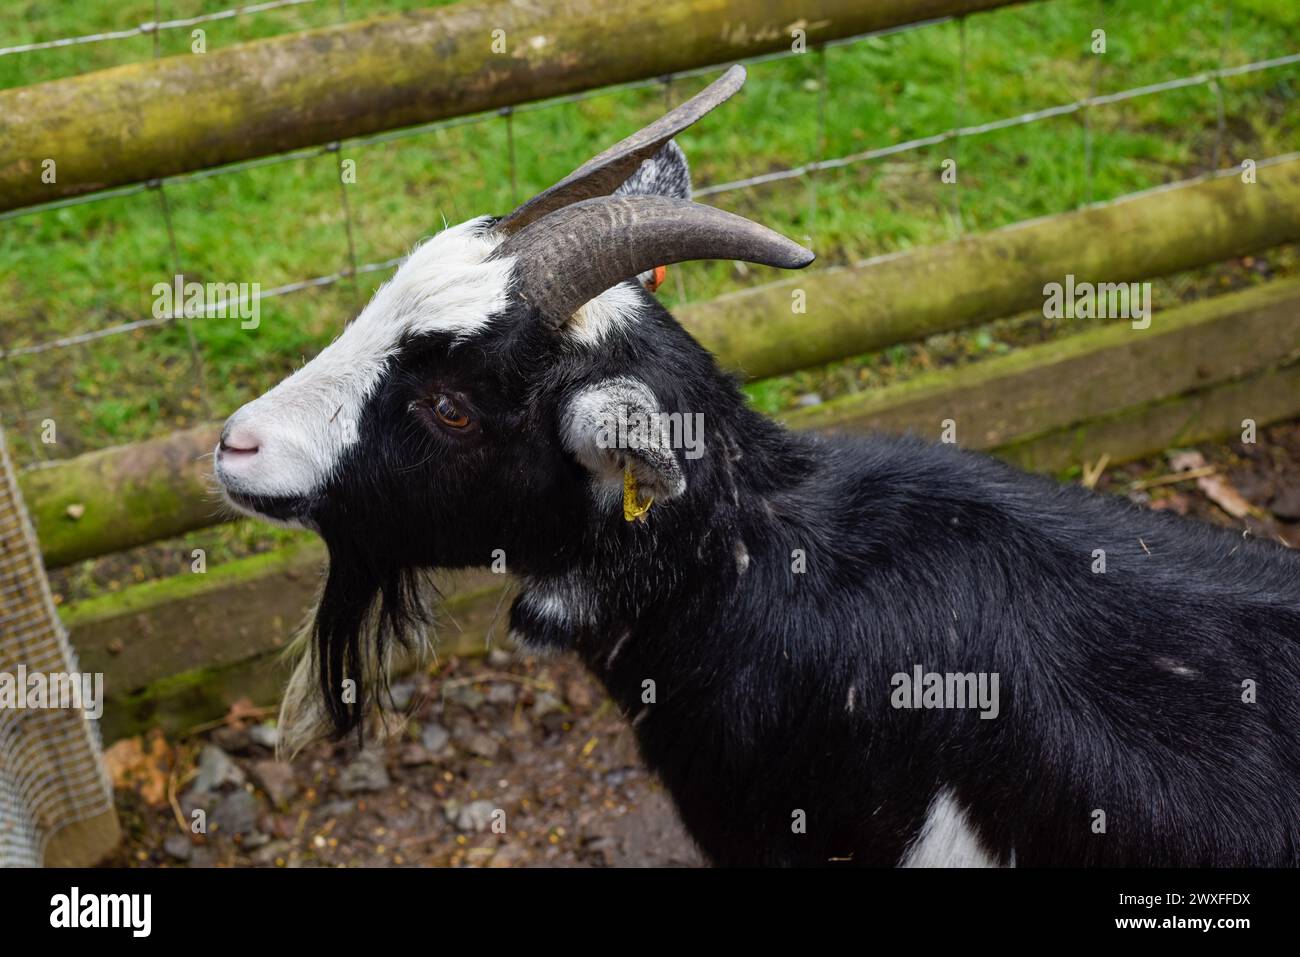 Young black and white haired billy goat with horns and a beard Stock Photo